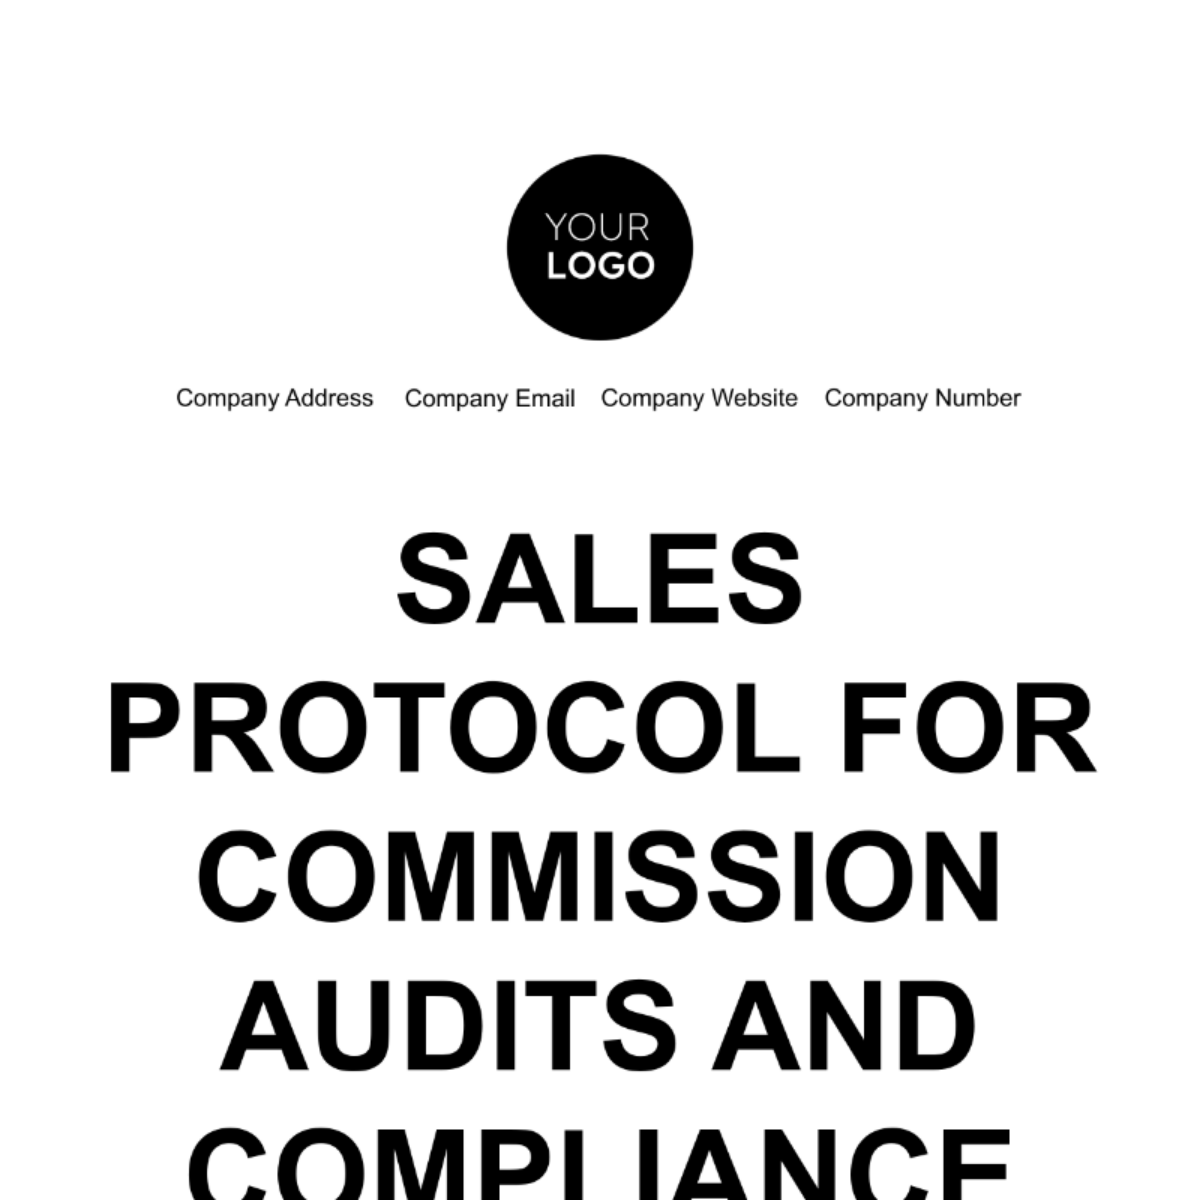 Sales Protocol for Commission Audits and Compliance Template